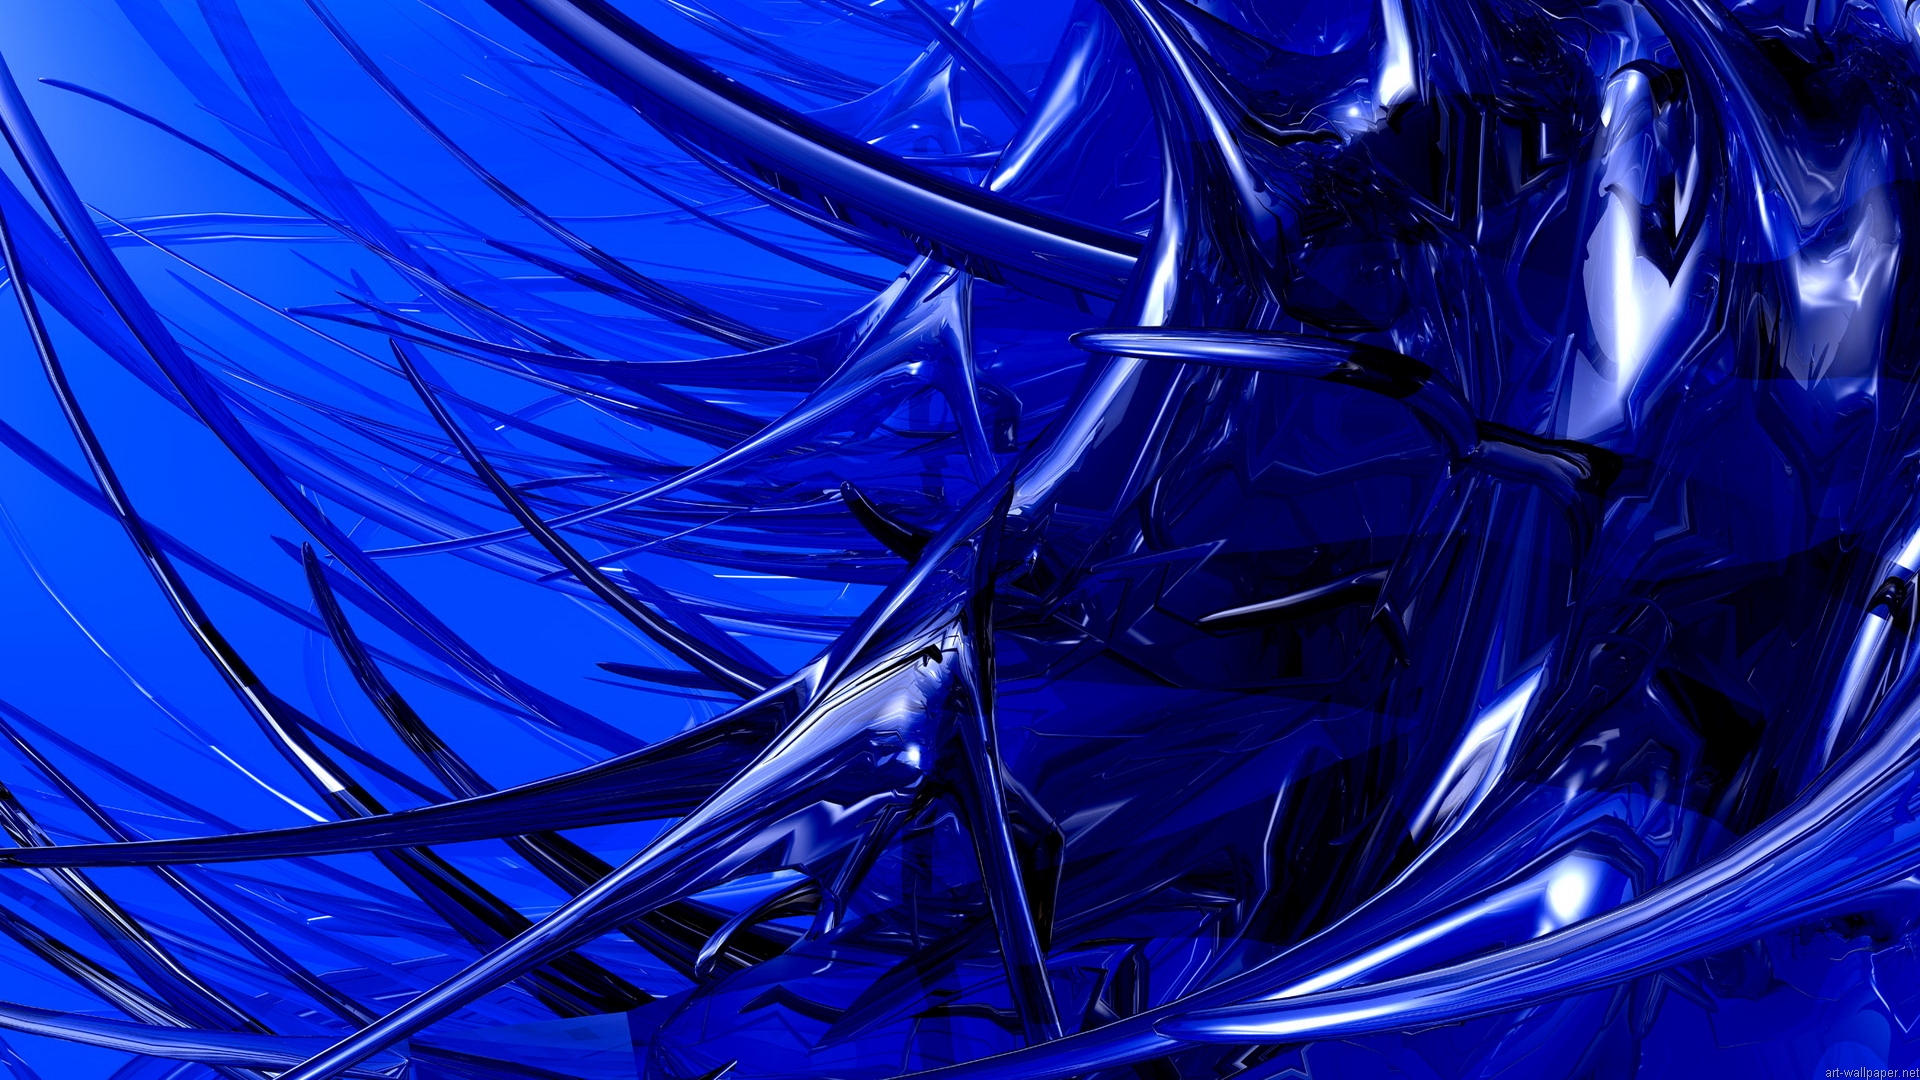  45 HD  Abstract  Wallpaper  Widescreen  1920x1080  on 